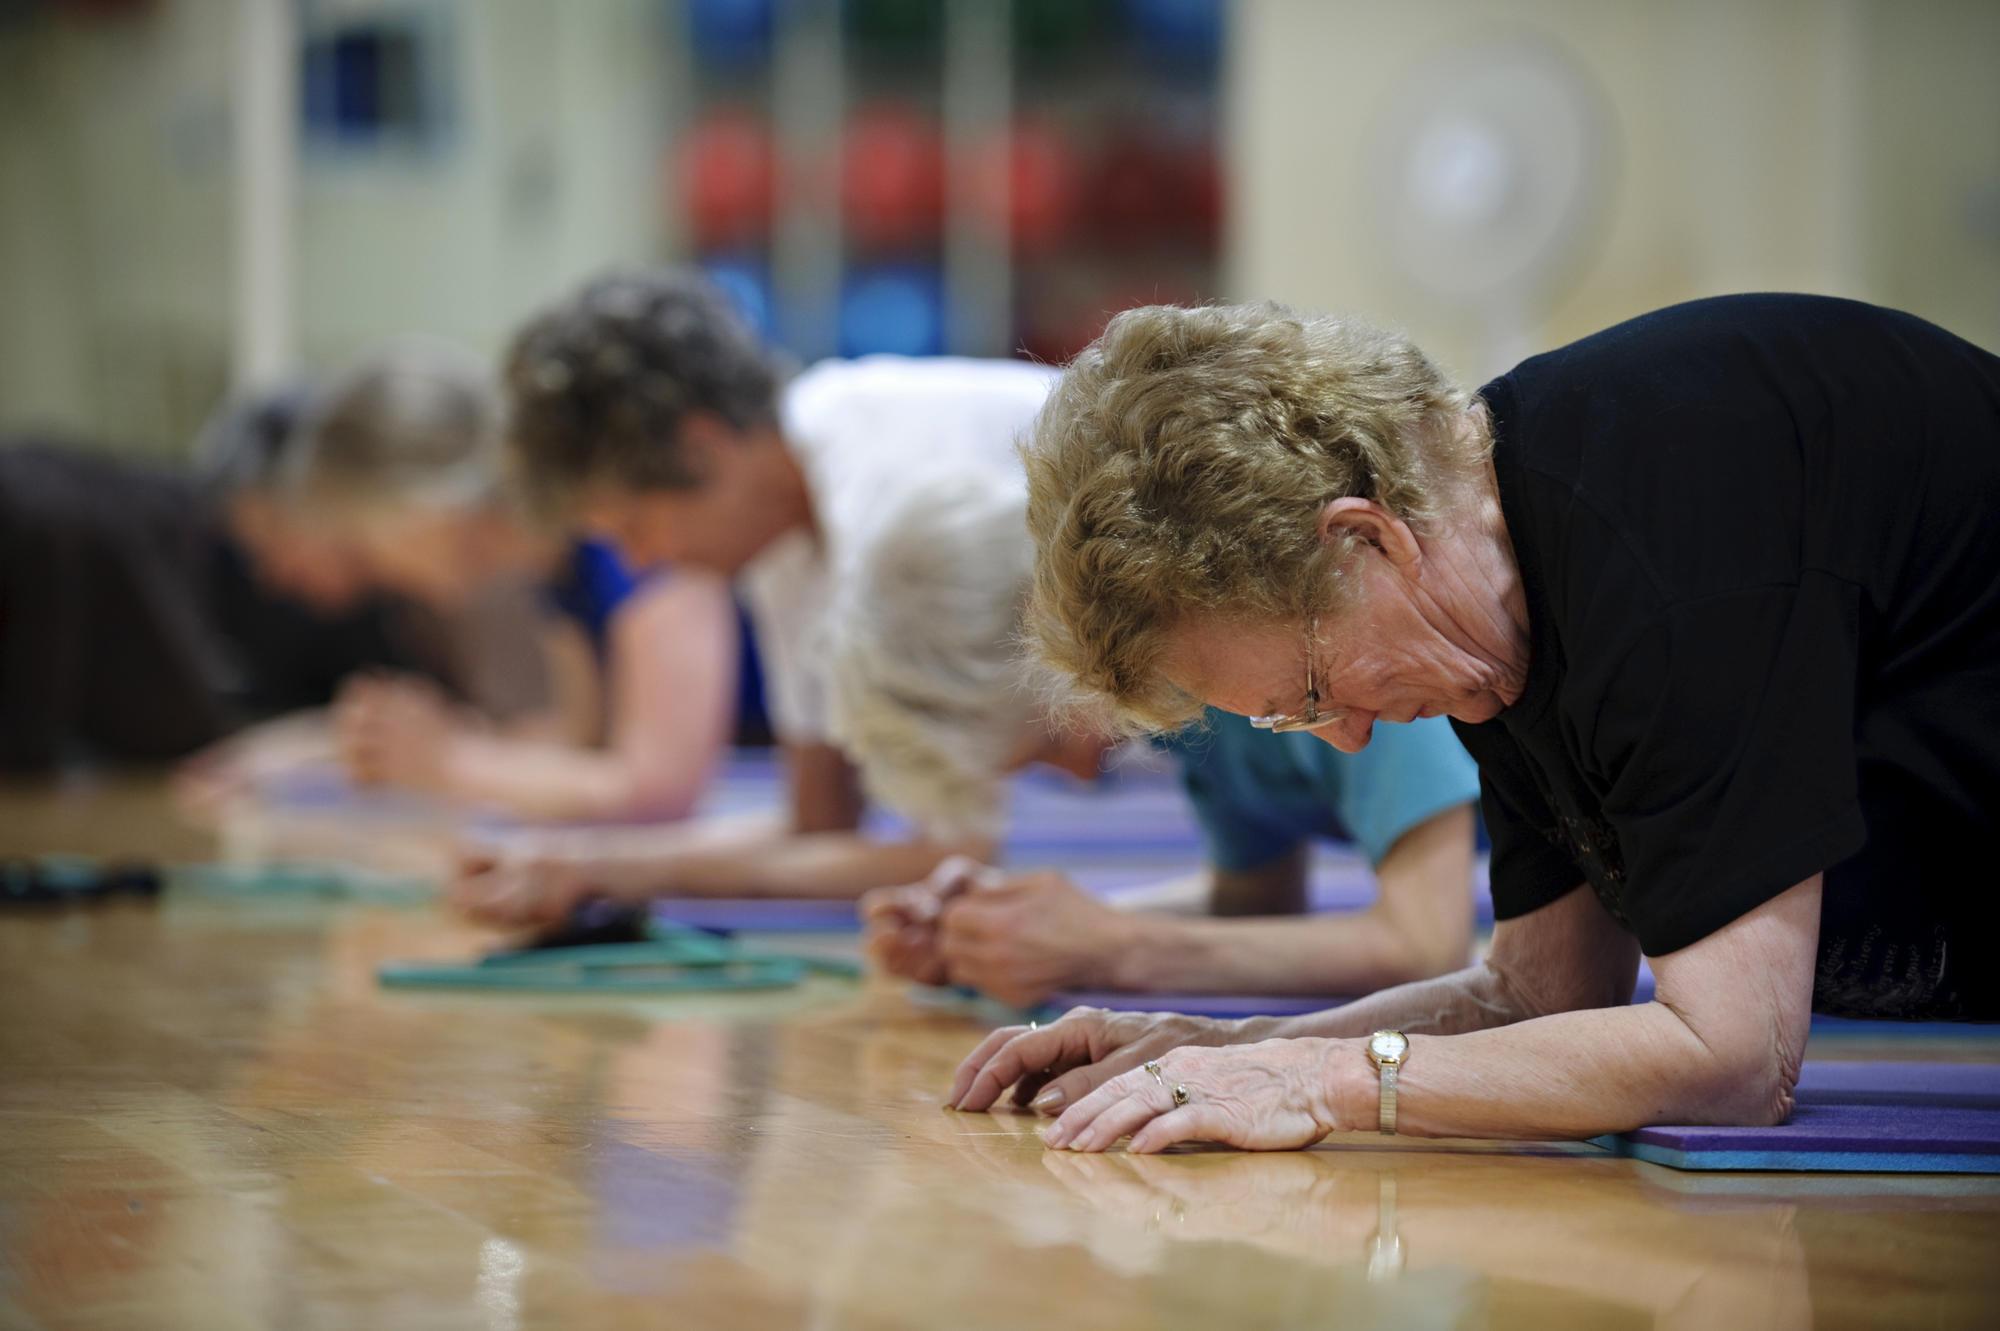 women doing planks on exercise mats in a gym